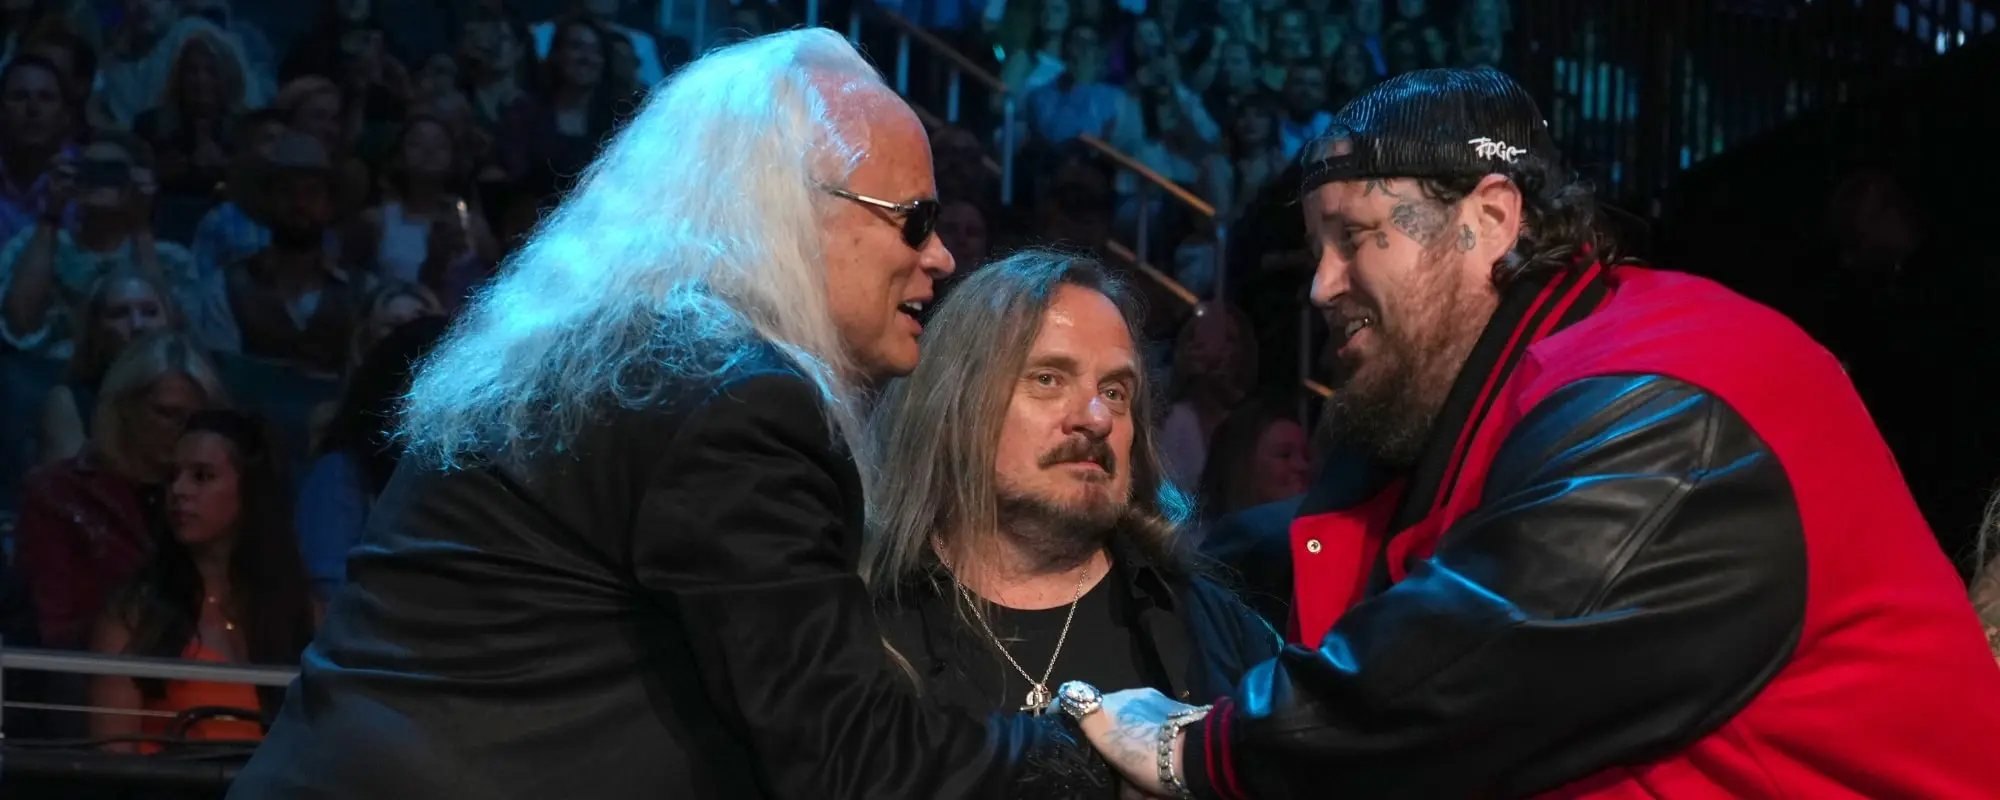 Watch: Jelly Roll Receives Guitar on Behalf of Late Gary Rossington After Performing with Lynyrd Skynyrd